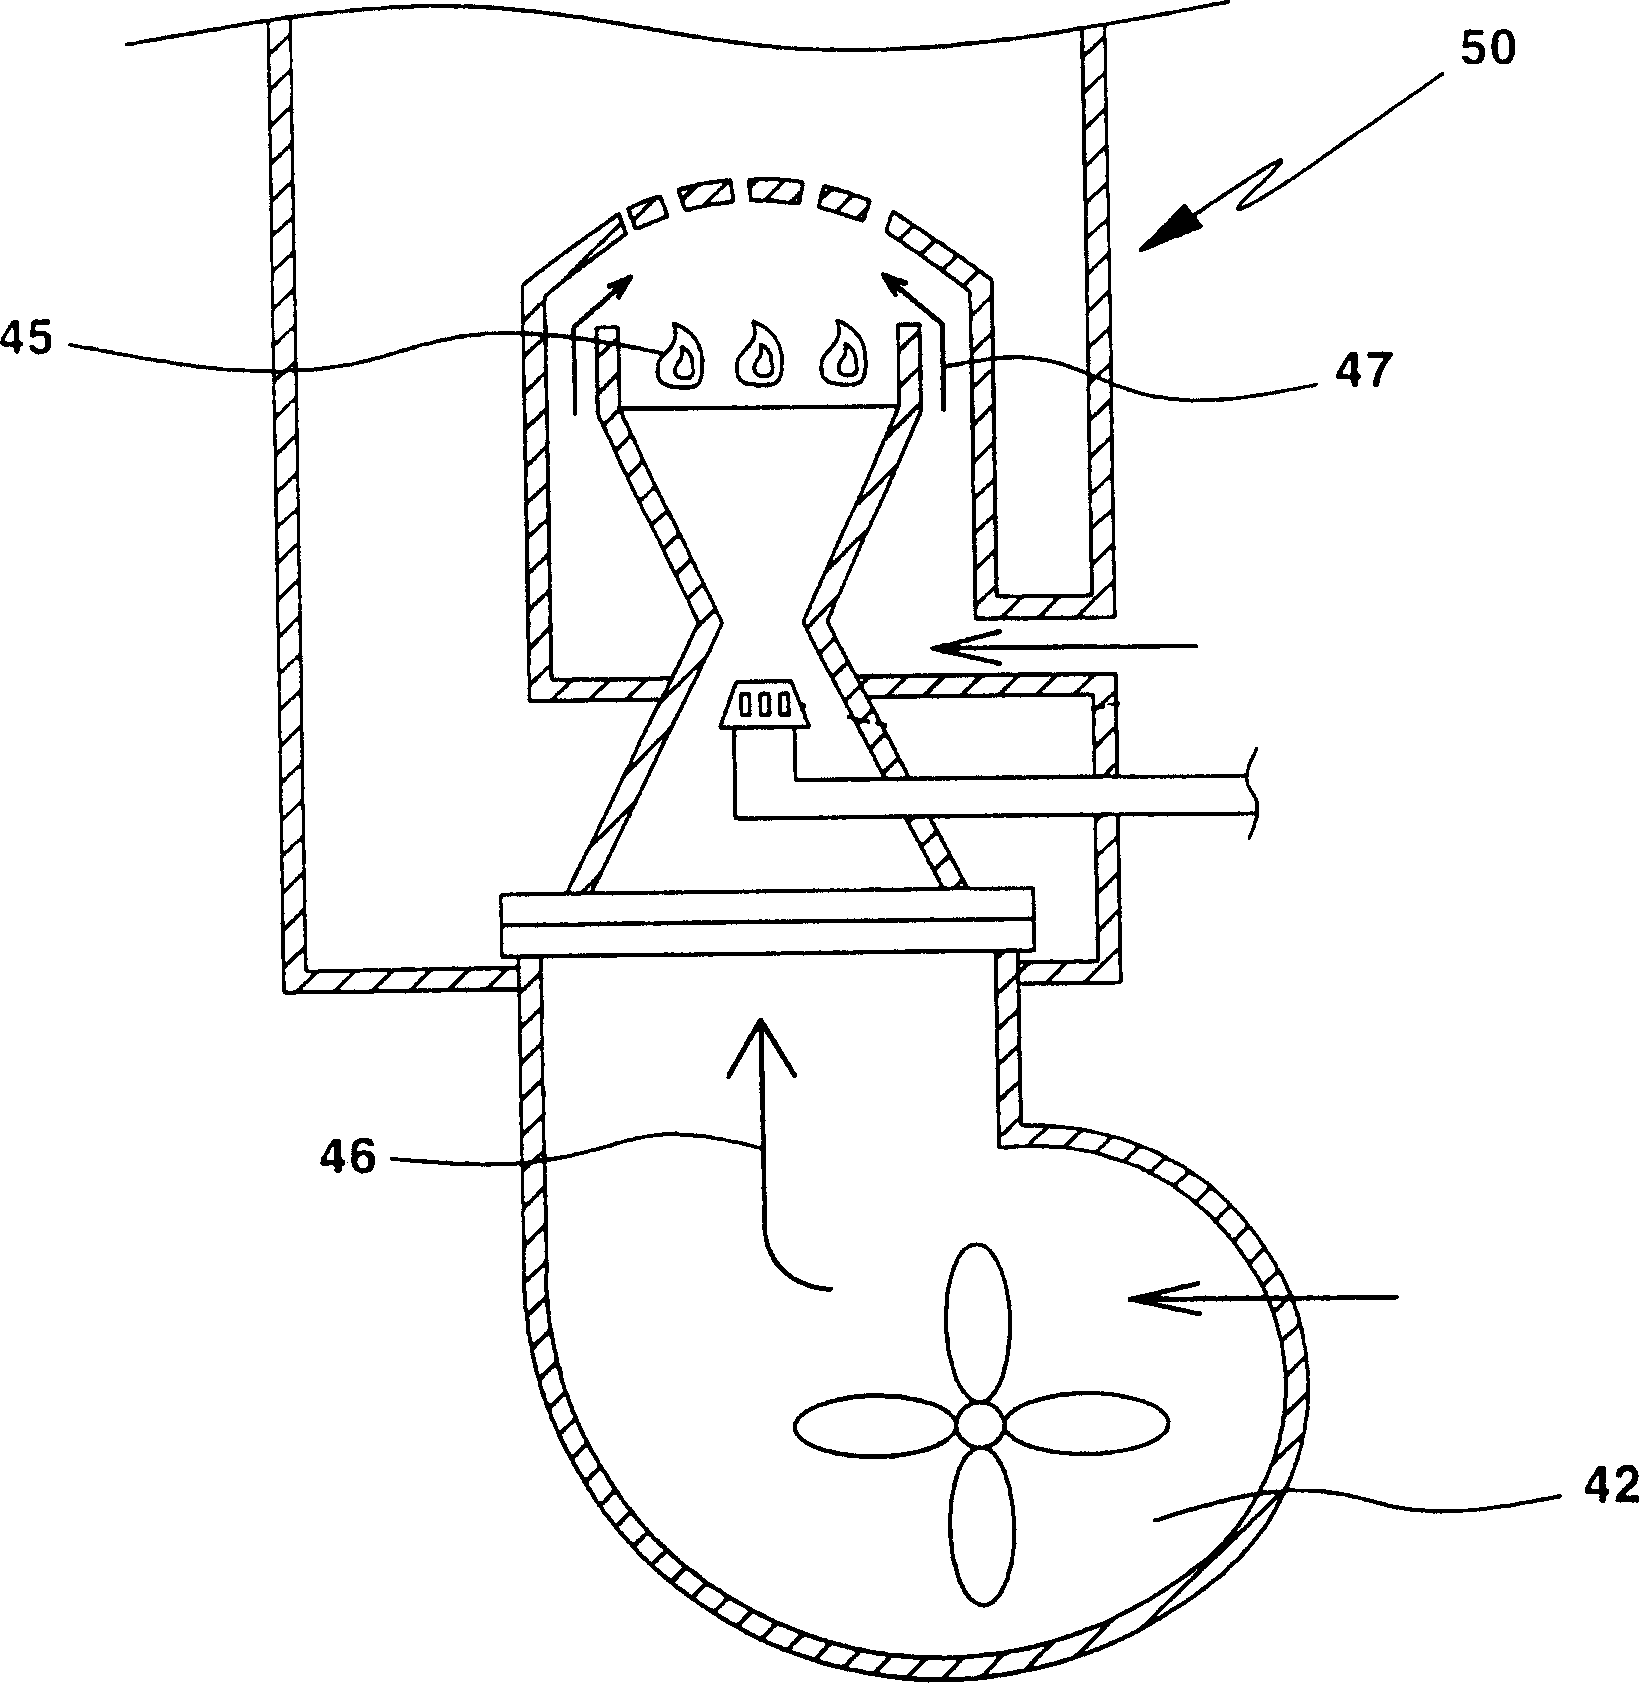 Gas burner capable of multilevel controlled